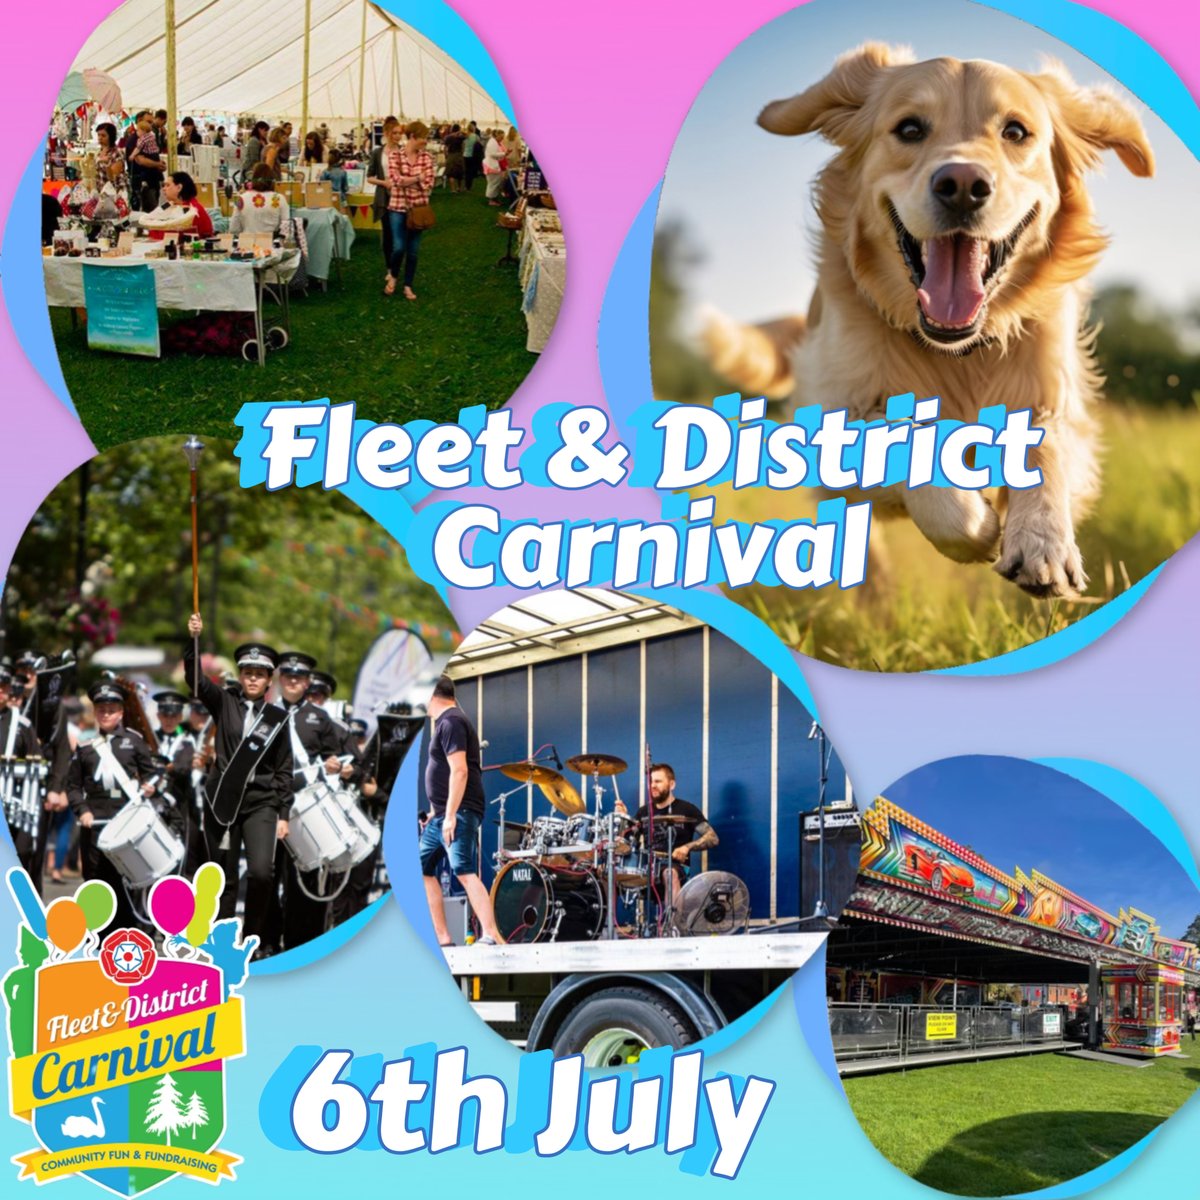 On July 6th, the 67th @Fleet_Carnival at Calthorpe Park will be a fantastic day out. This year’s SAFARI-themed event promises fun for the whole family with stalls, games, live music, and a dog show. Join us to support @ParityFD. fleetcarnival.org #Fleet #hampshire #carnival